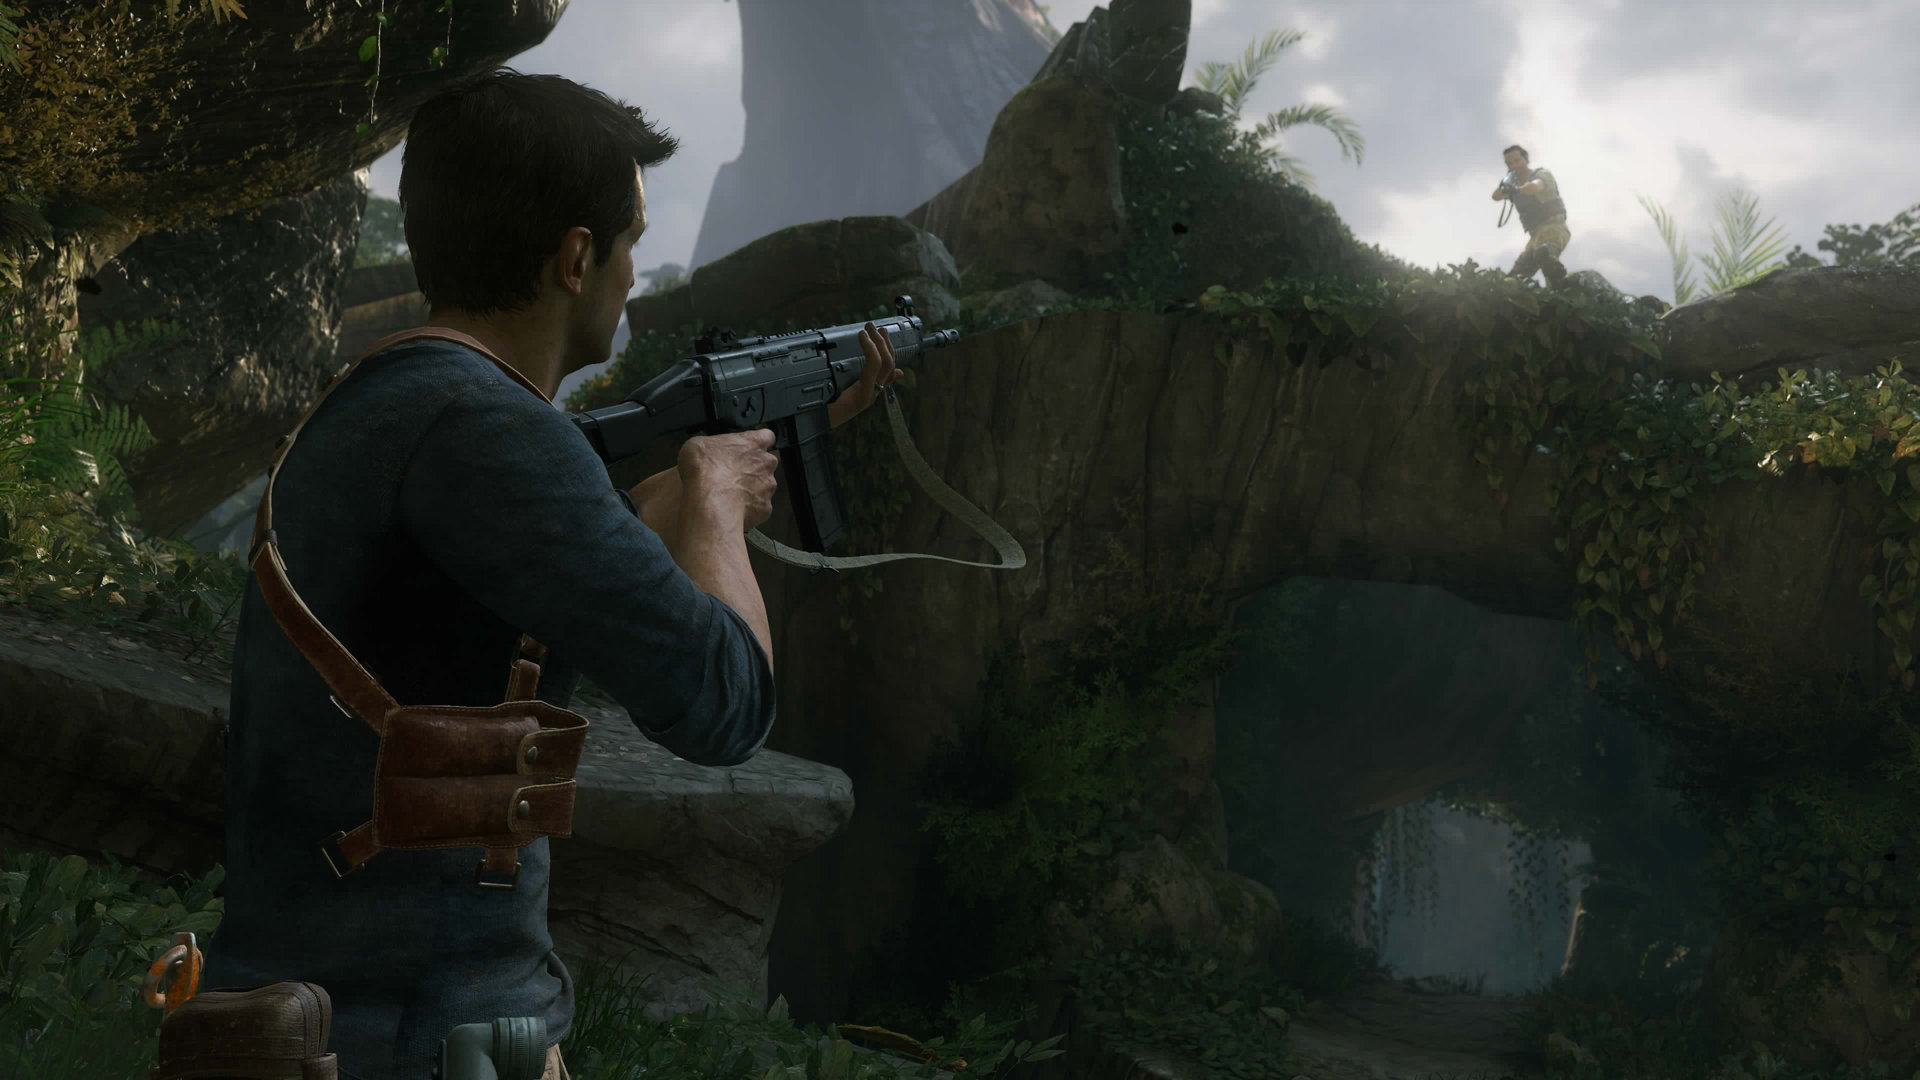 [PS4] Uncharted 4: A Thiefs End